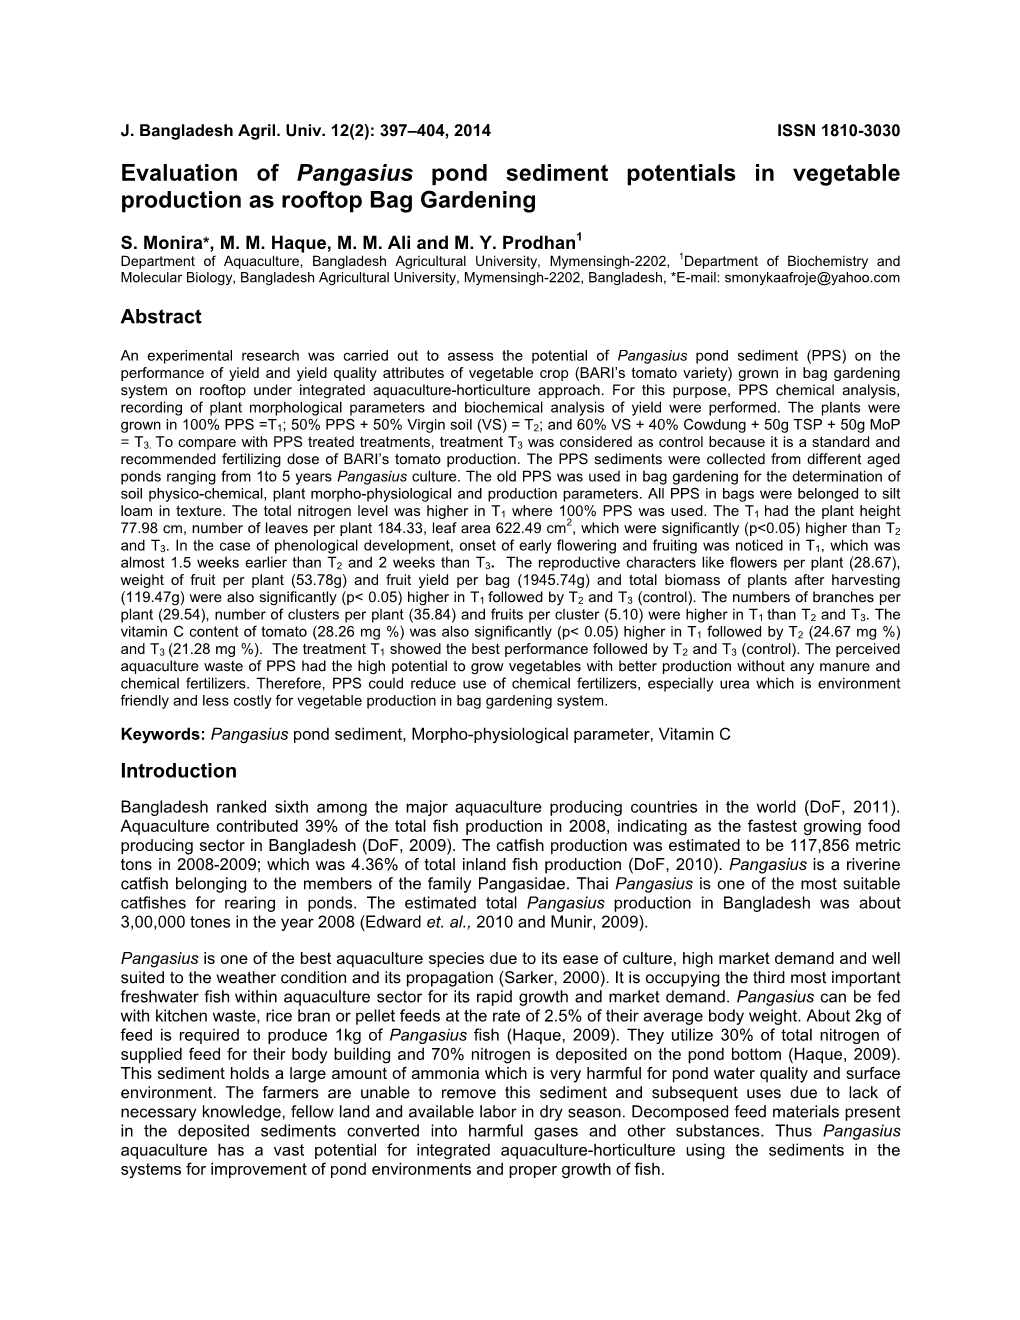 Evaluation of Pangasius Pond Sediment Potentials in Vegetable Production As Rooftop Bag Gardening